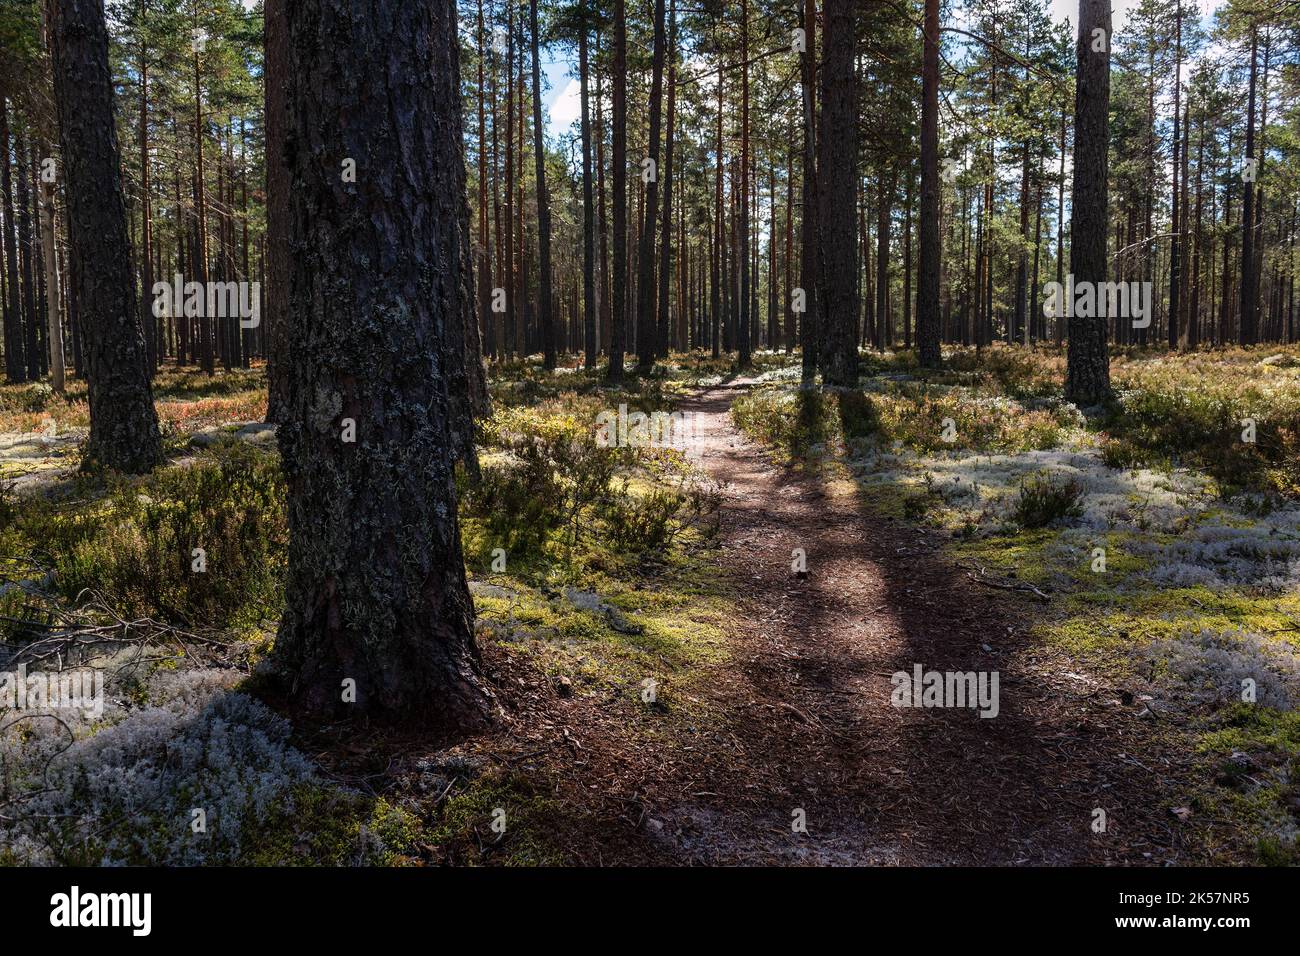 Hiking trail through a forest with large trunks of pine trees in Lauhanvuori National Park, Isojoki, Finland Stock Photo